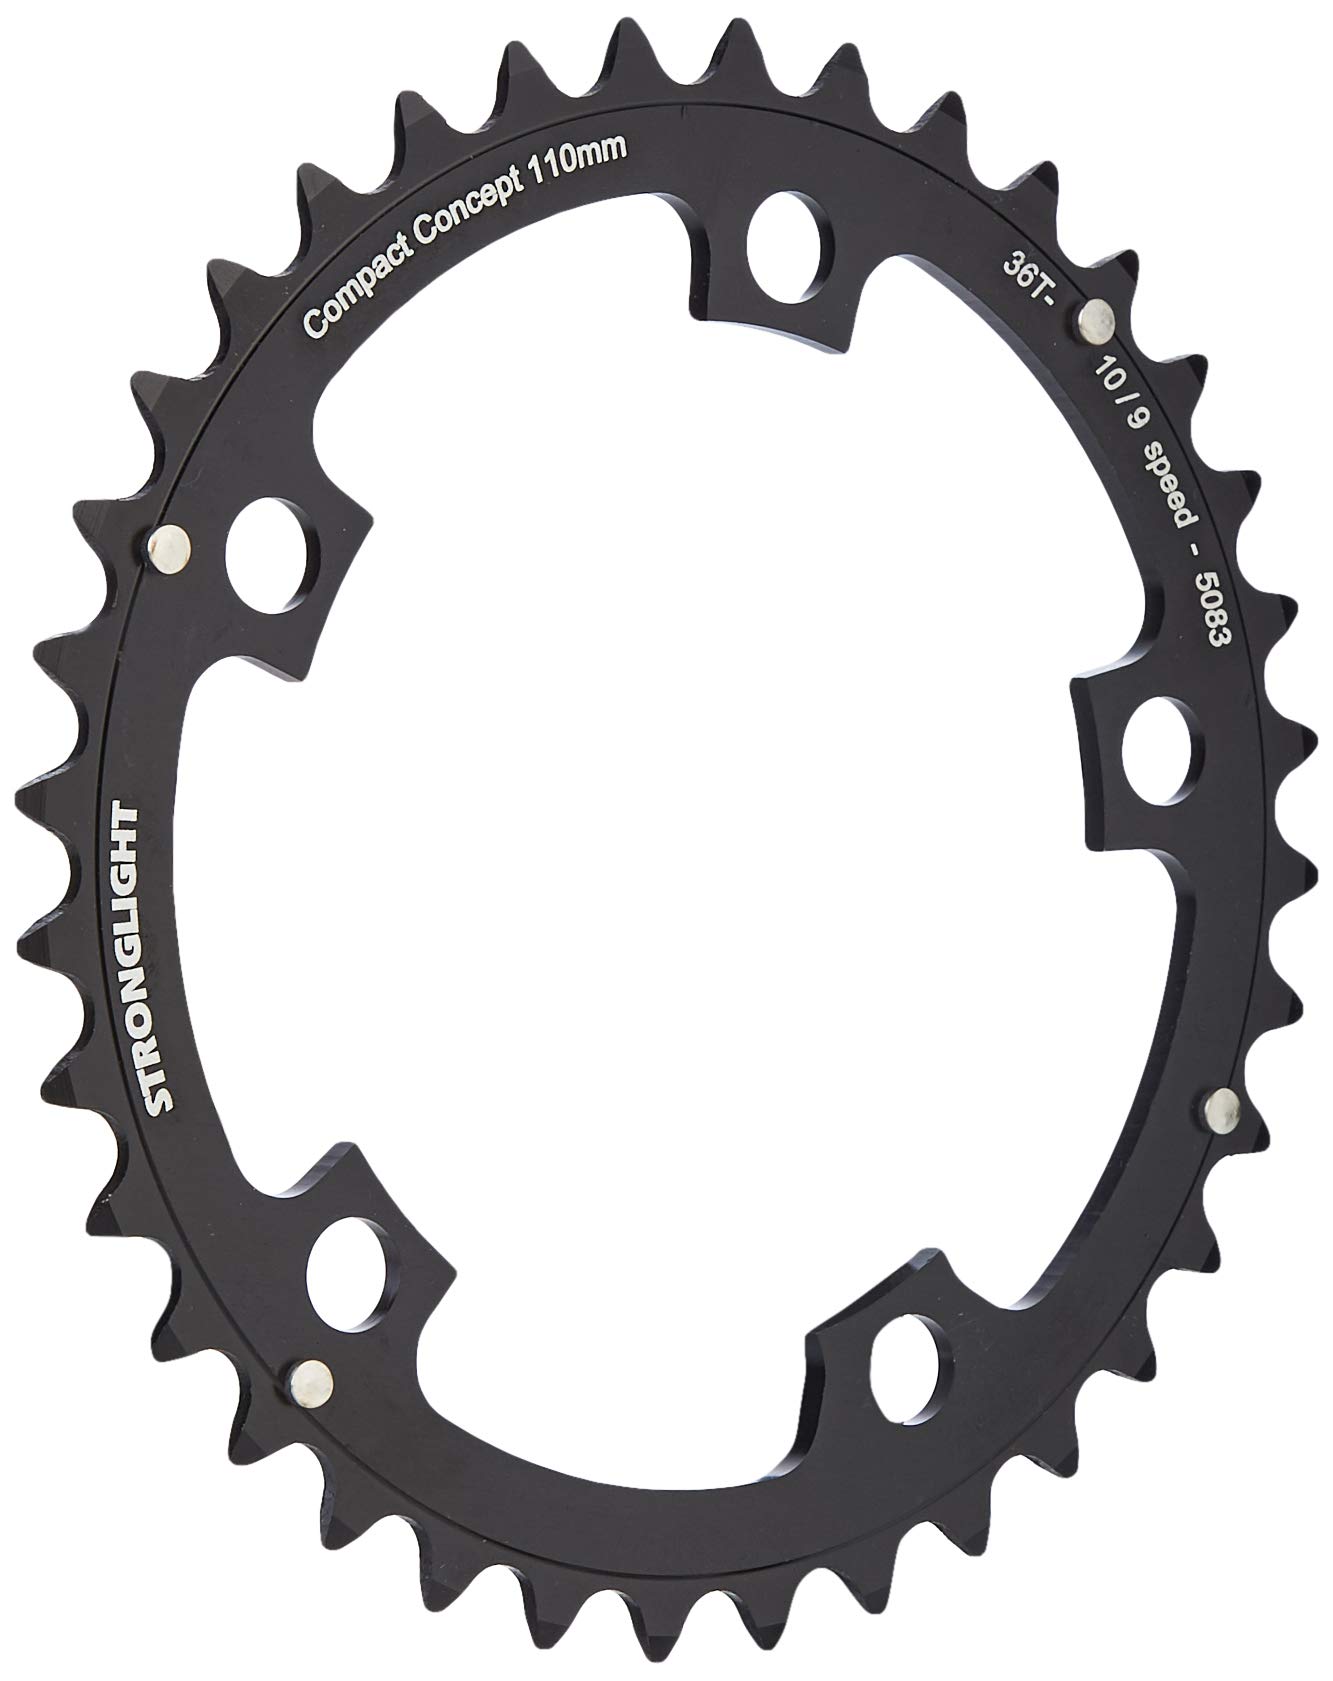 RD11034Z Stronglight 34T Black 5-Arm/110mm Chainring